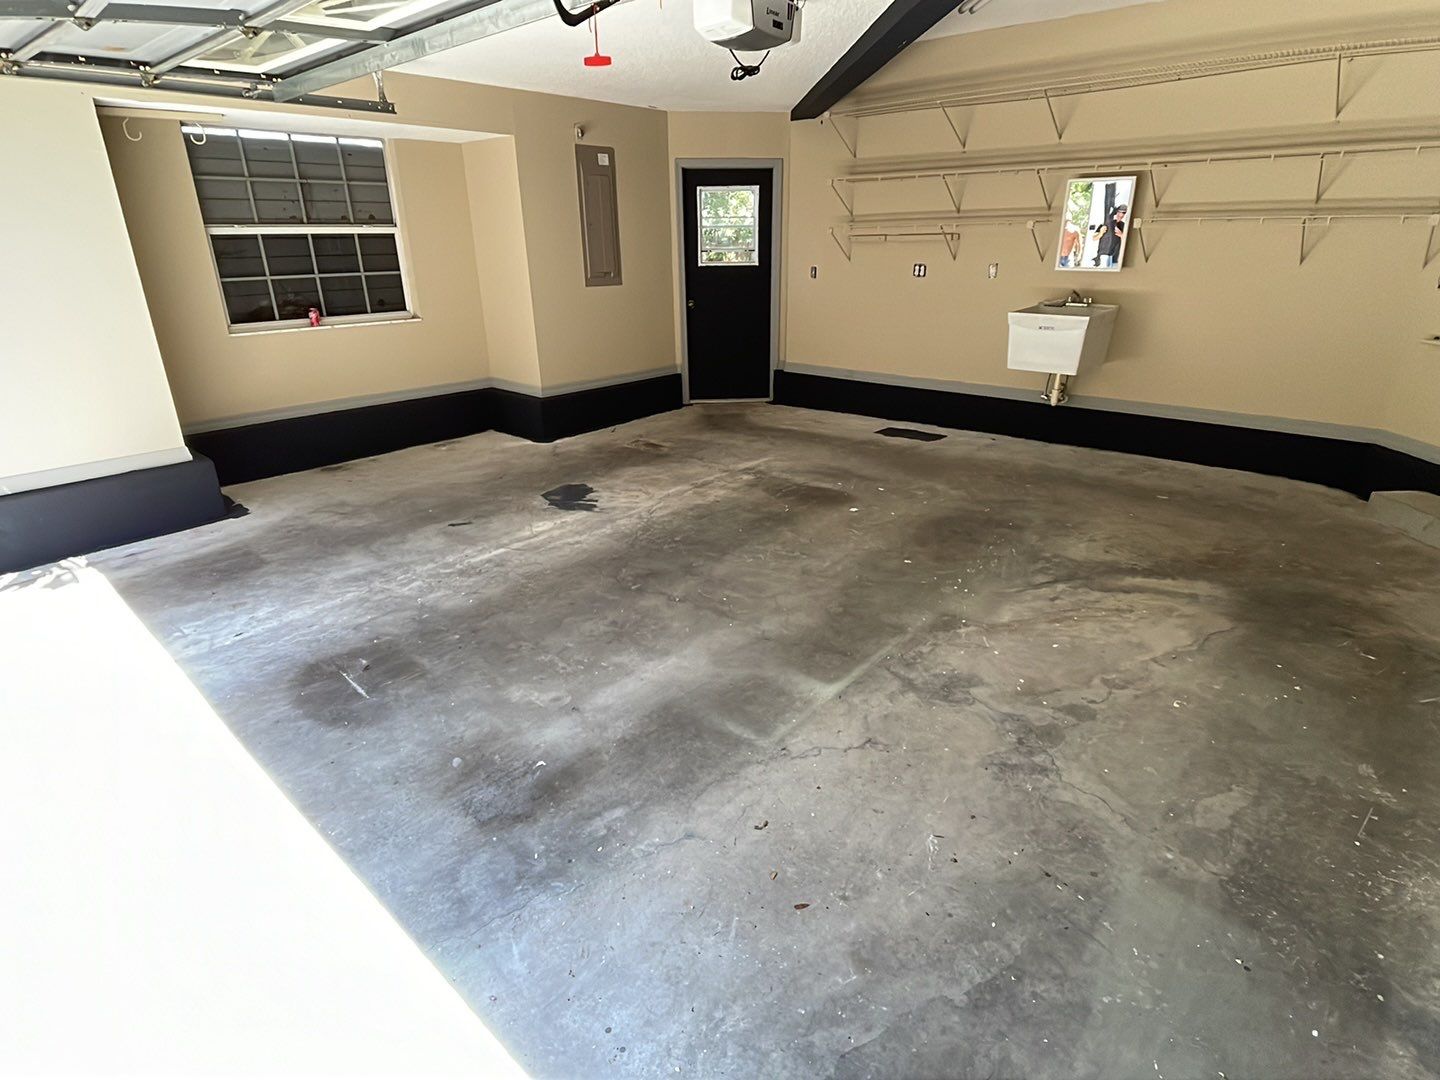 Garage with stained bare concrete floor